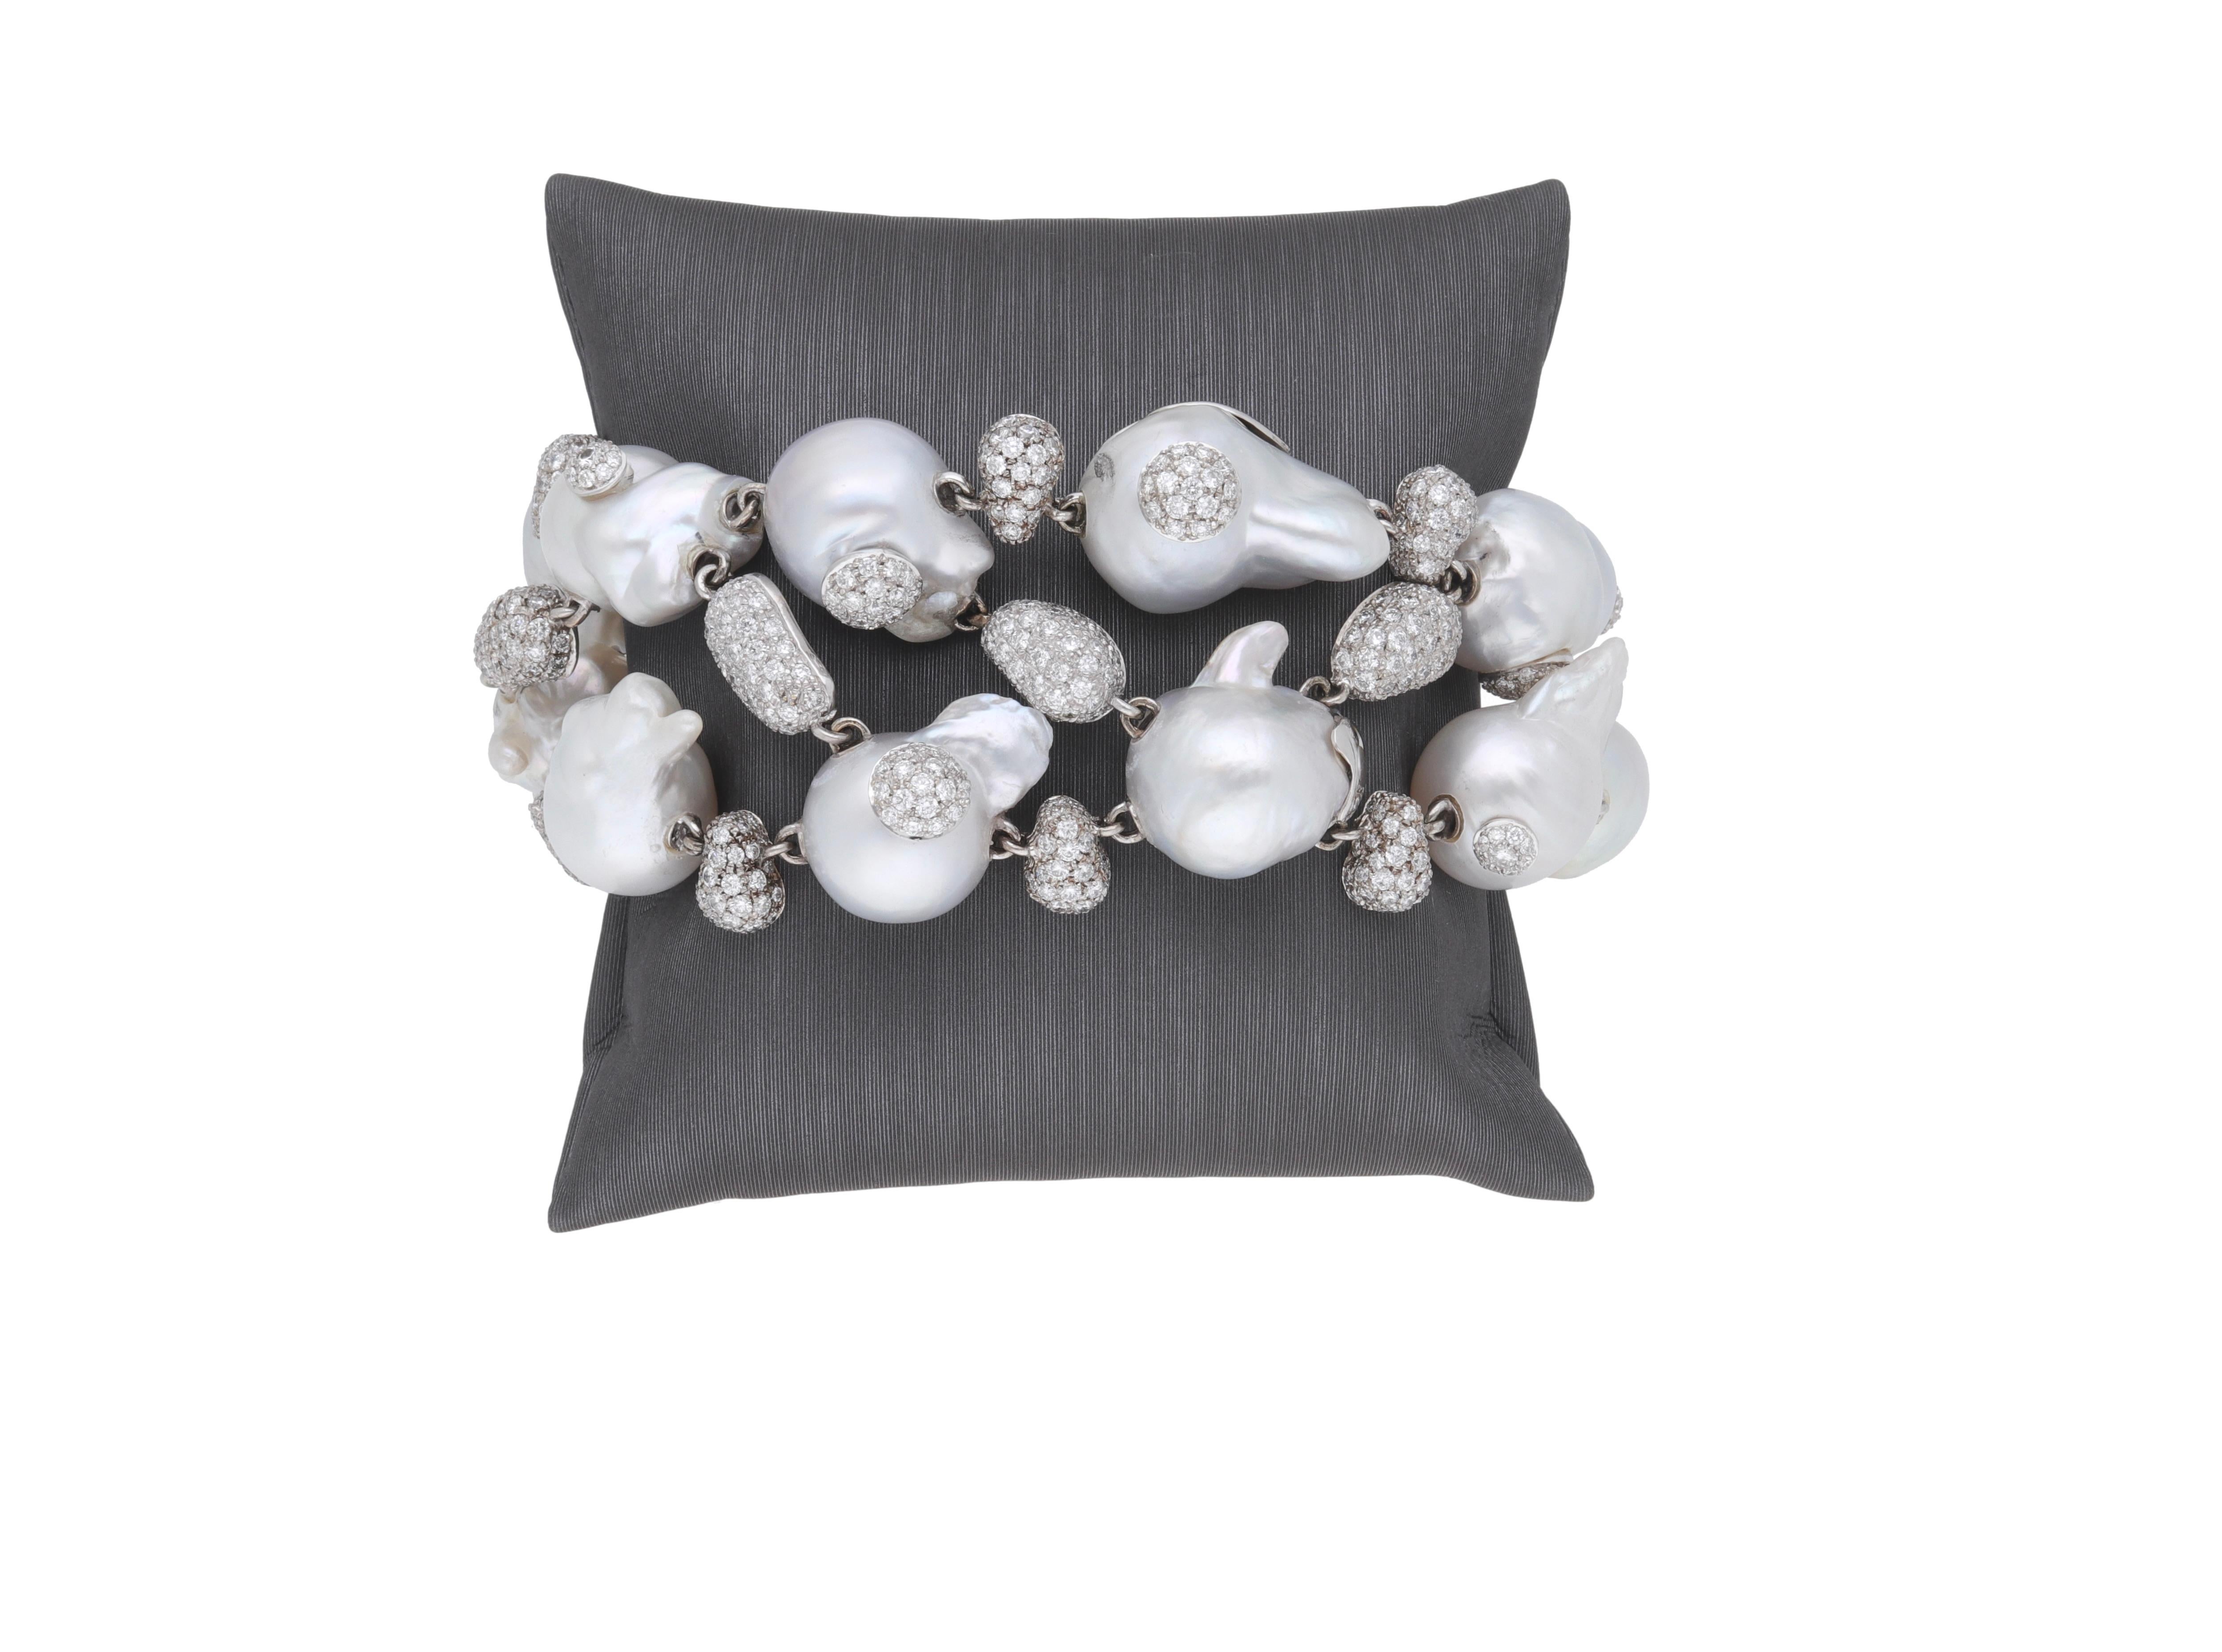 Handcrafted bracelet made in Italy of 18 kt. white gold with brilliant-cut diamonds and Australian baroque pearls.
Unique piece.
This bracelet is part of the Moon Fraleoni Collection.
The pearls are linked together by gold elements with